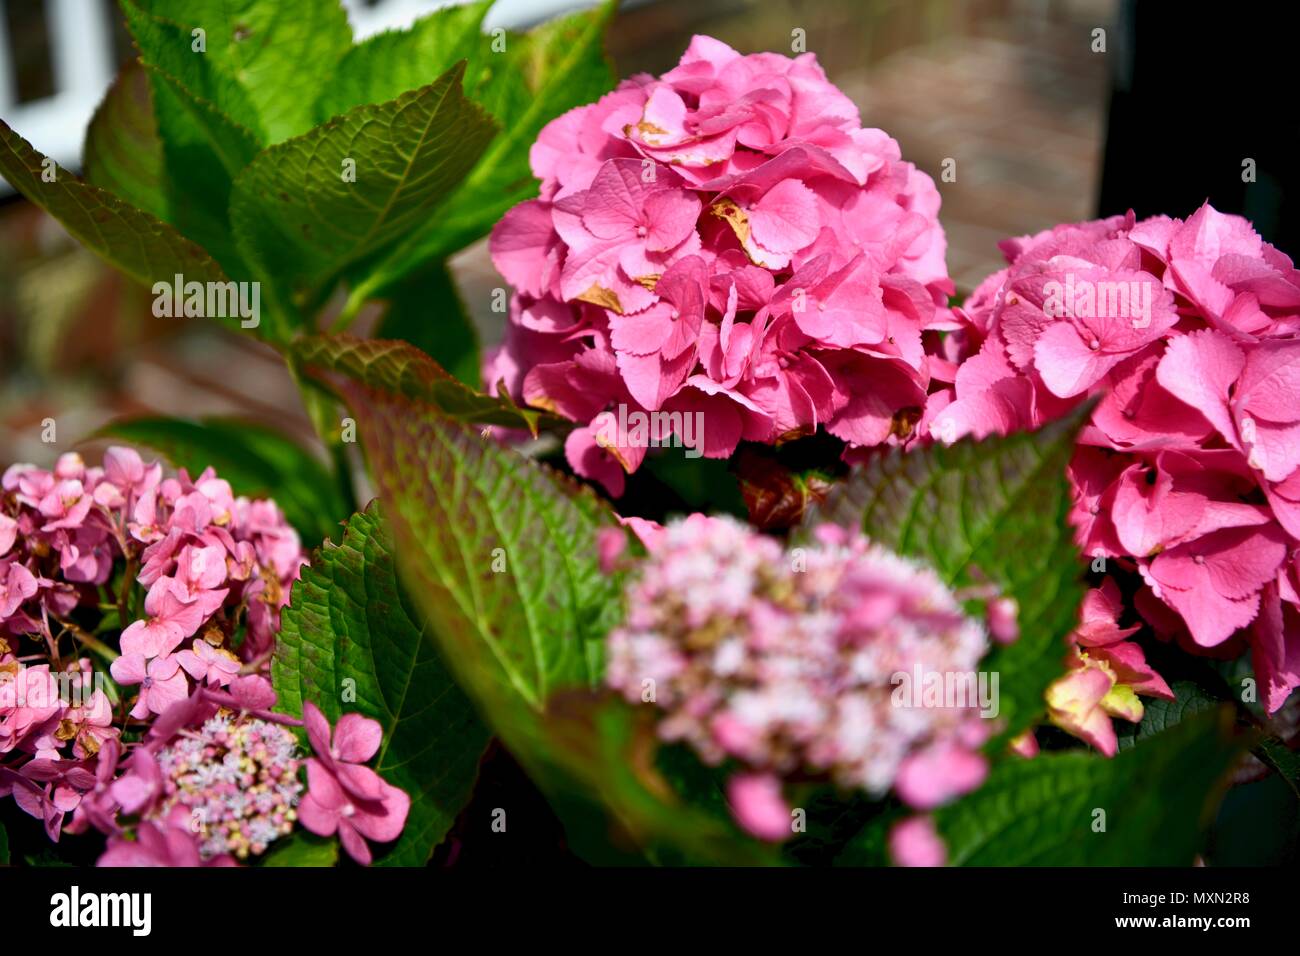 Pink Rhododendron bush in full blossom Stock Photo